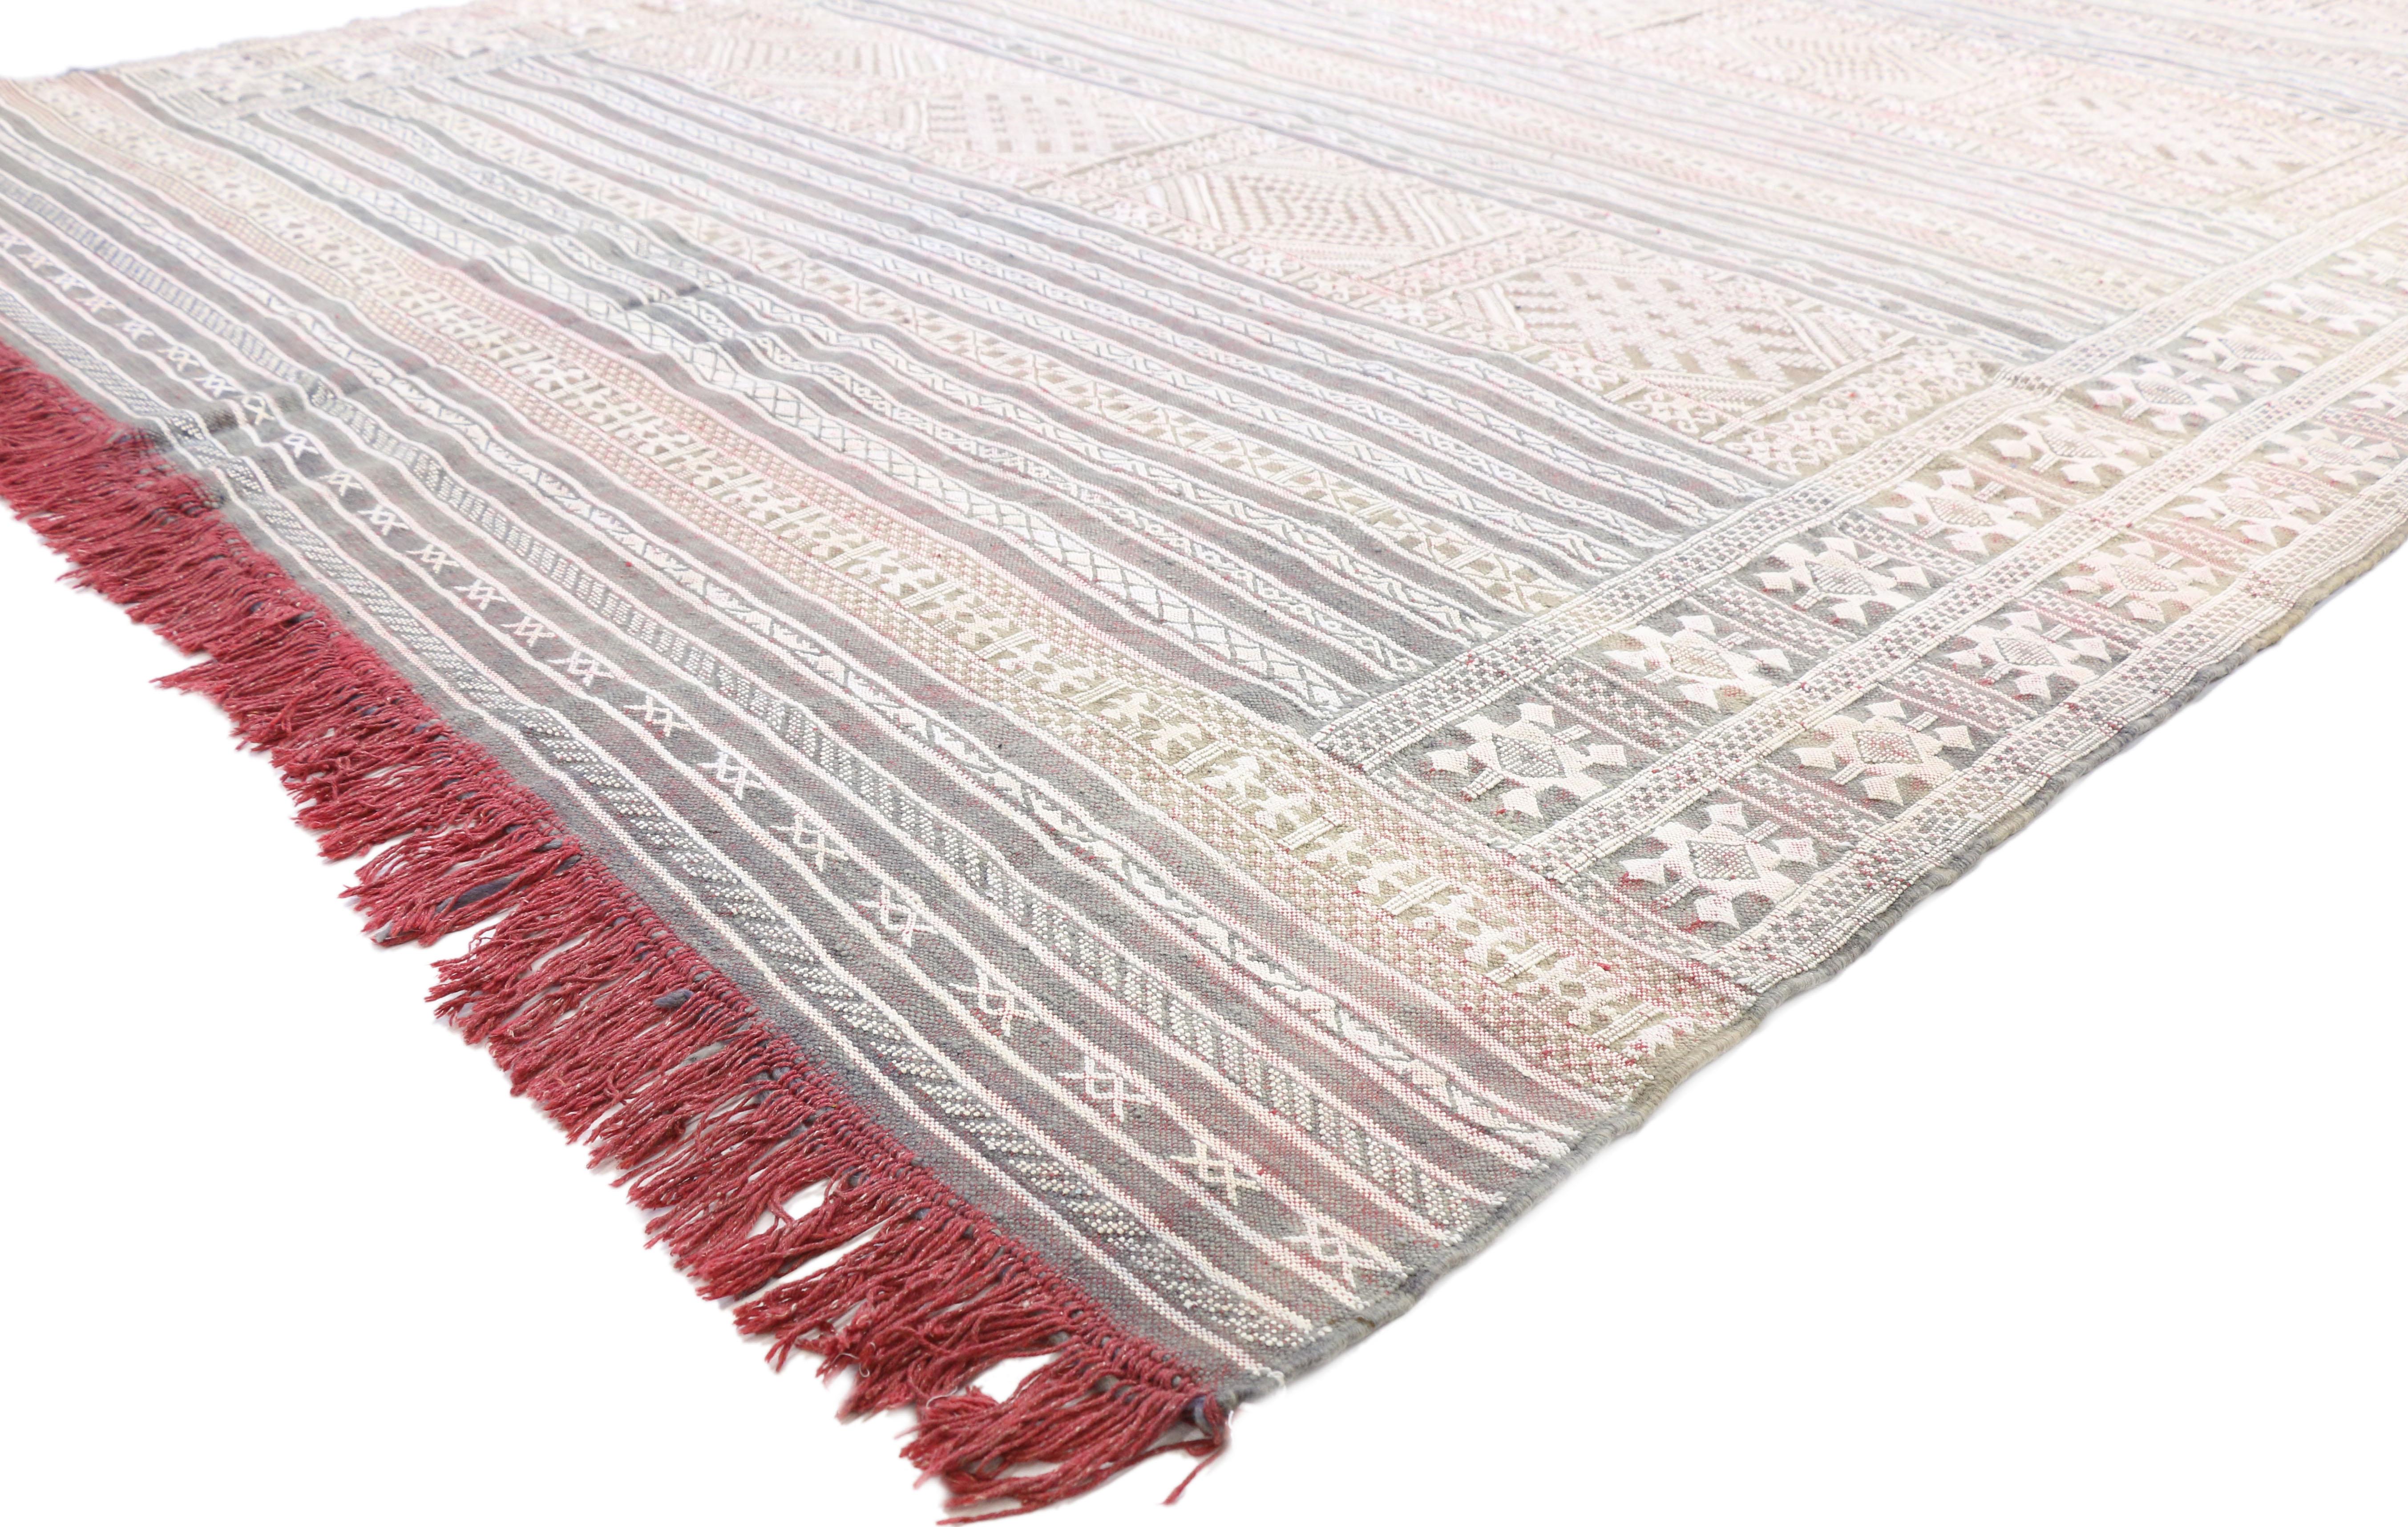 20782, vintage Moroccan Zemmour Berber Kilim area rug with Bohemian Tribal style. This handwoven wool vintage Moroccan Zemmour Berber Kilim rug features an all-over geometric pattern. It beautifully displays alternating rows of wide bands and